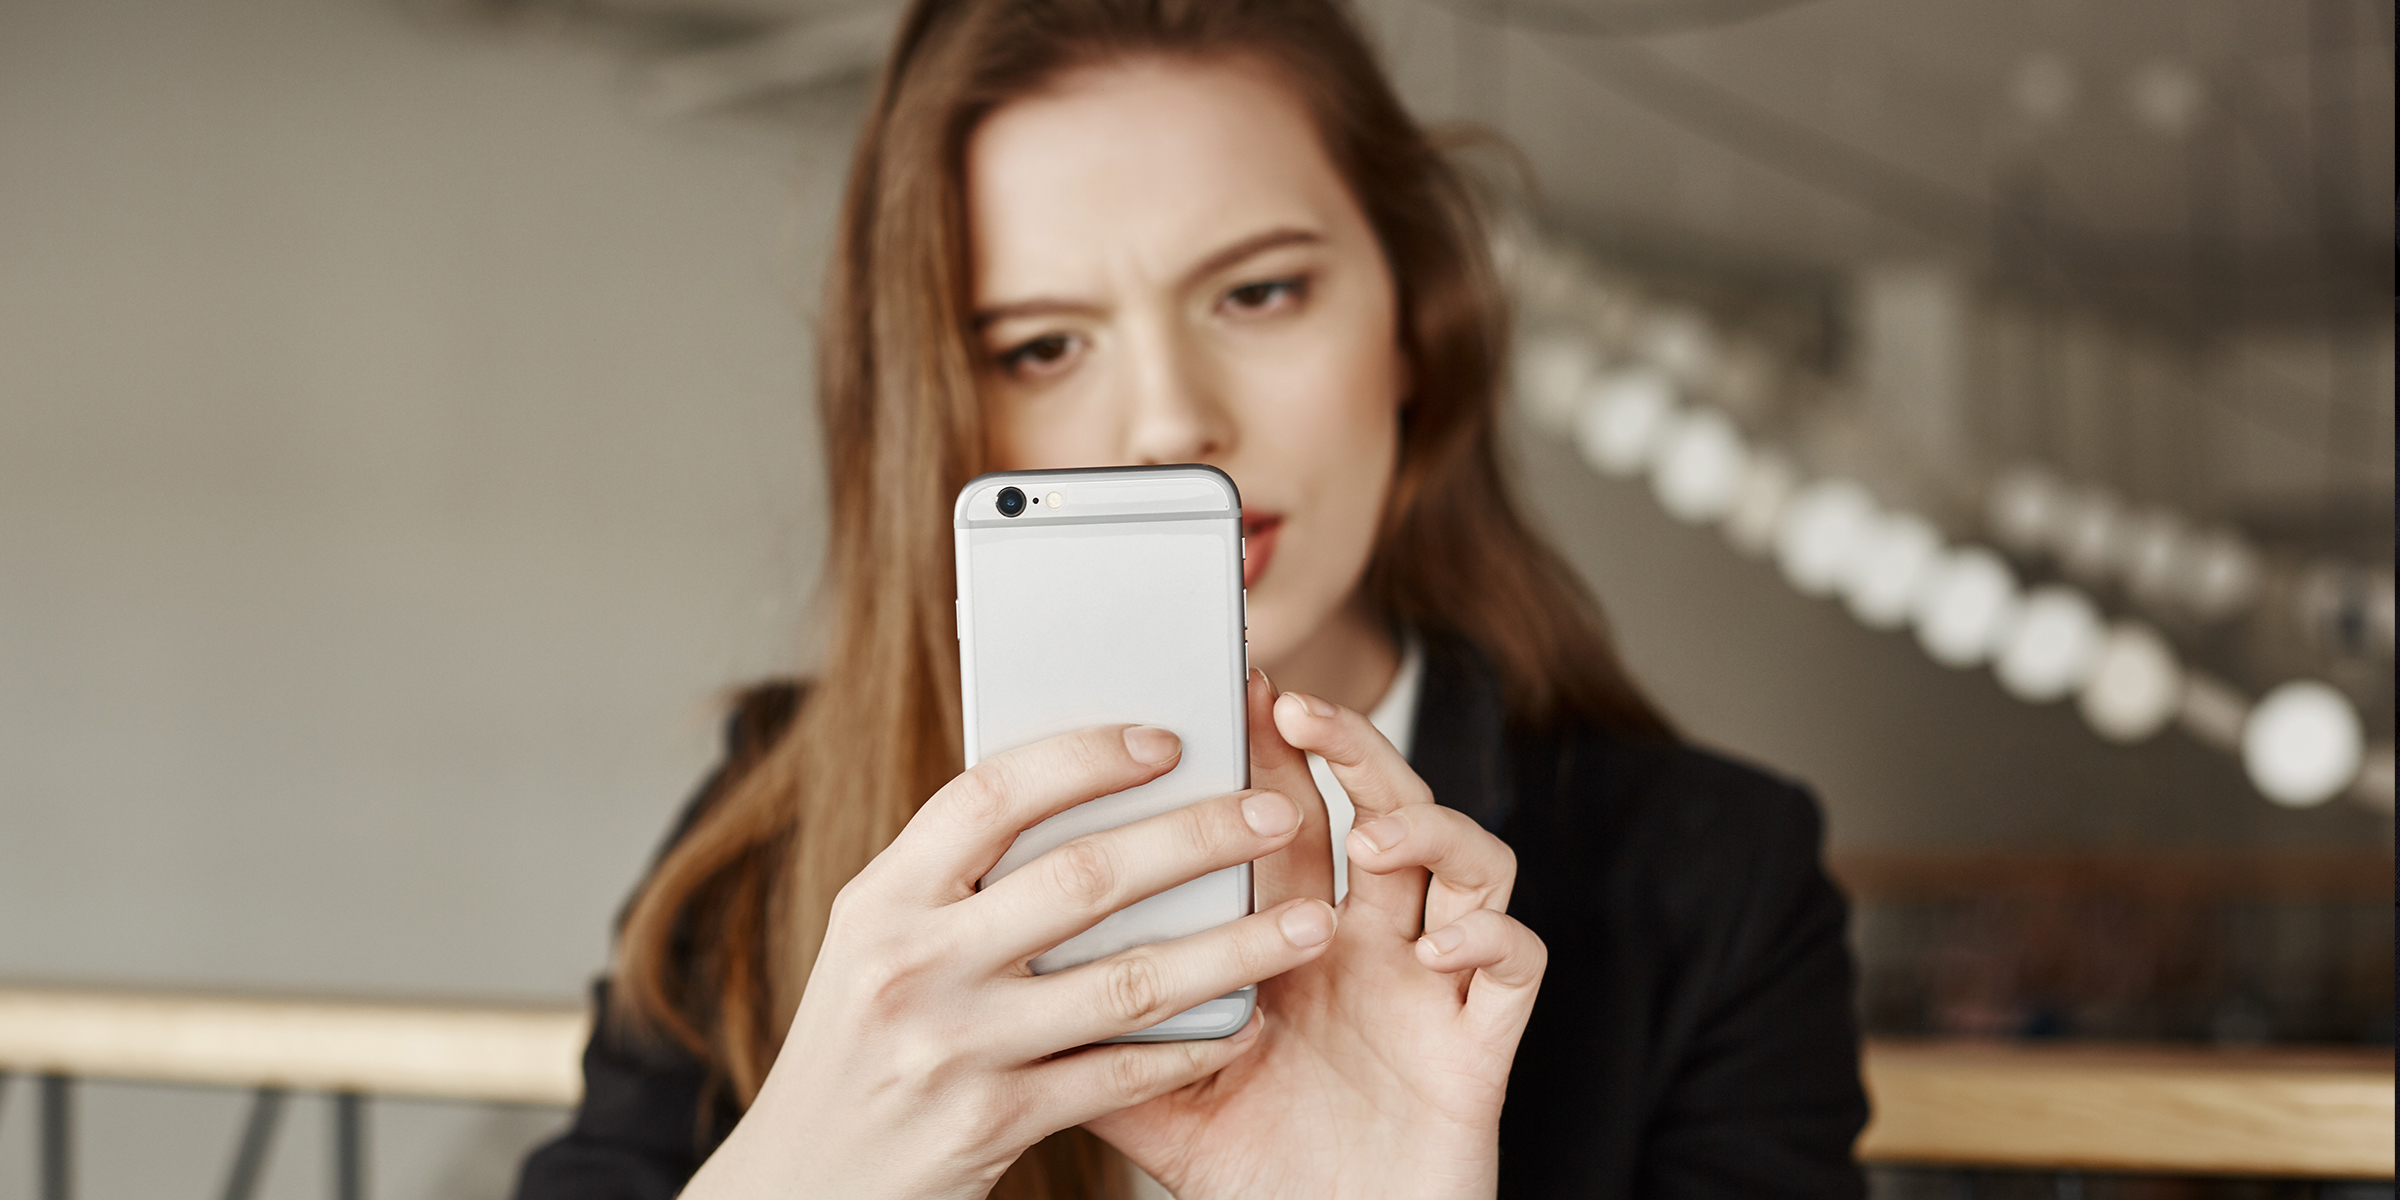 A woman frowning at her phone | Source: Freepik